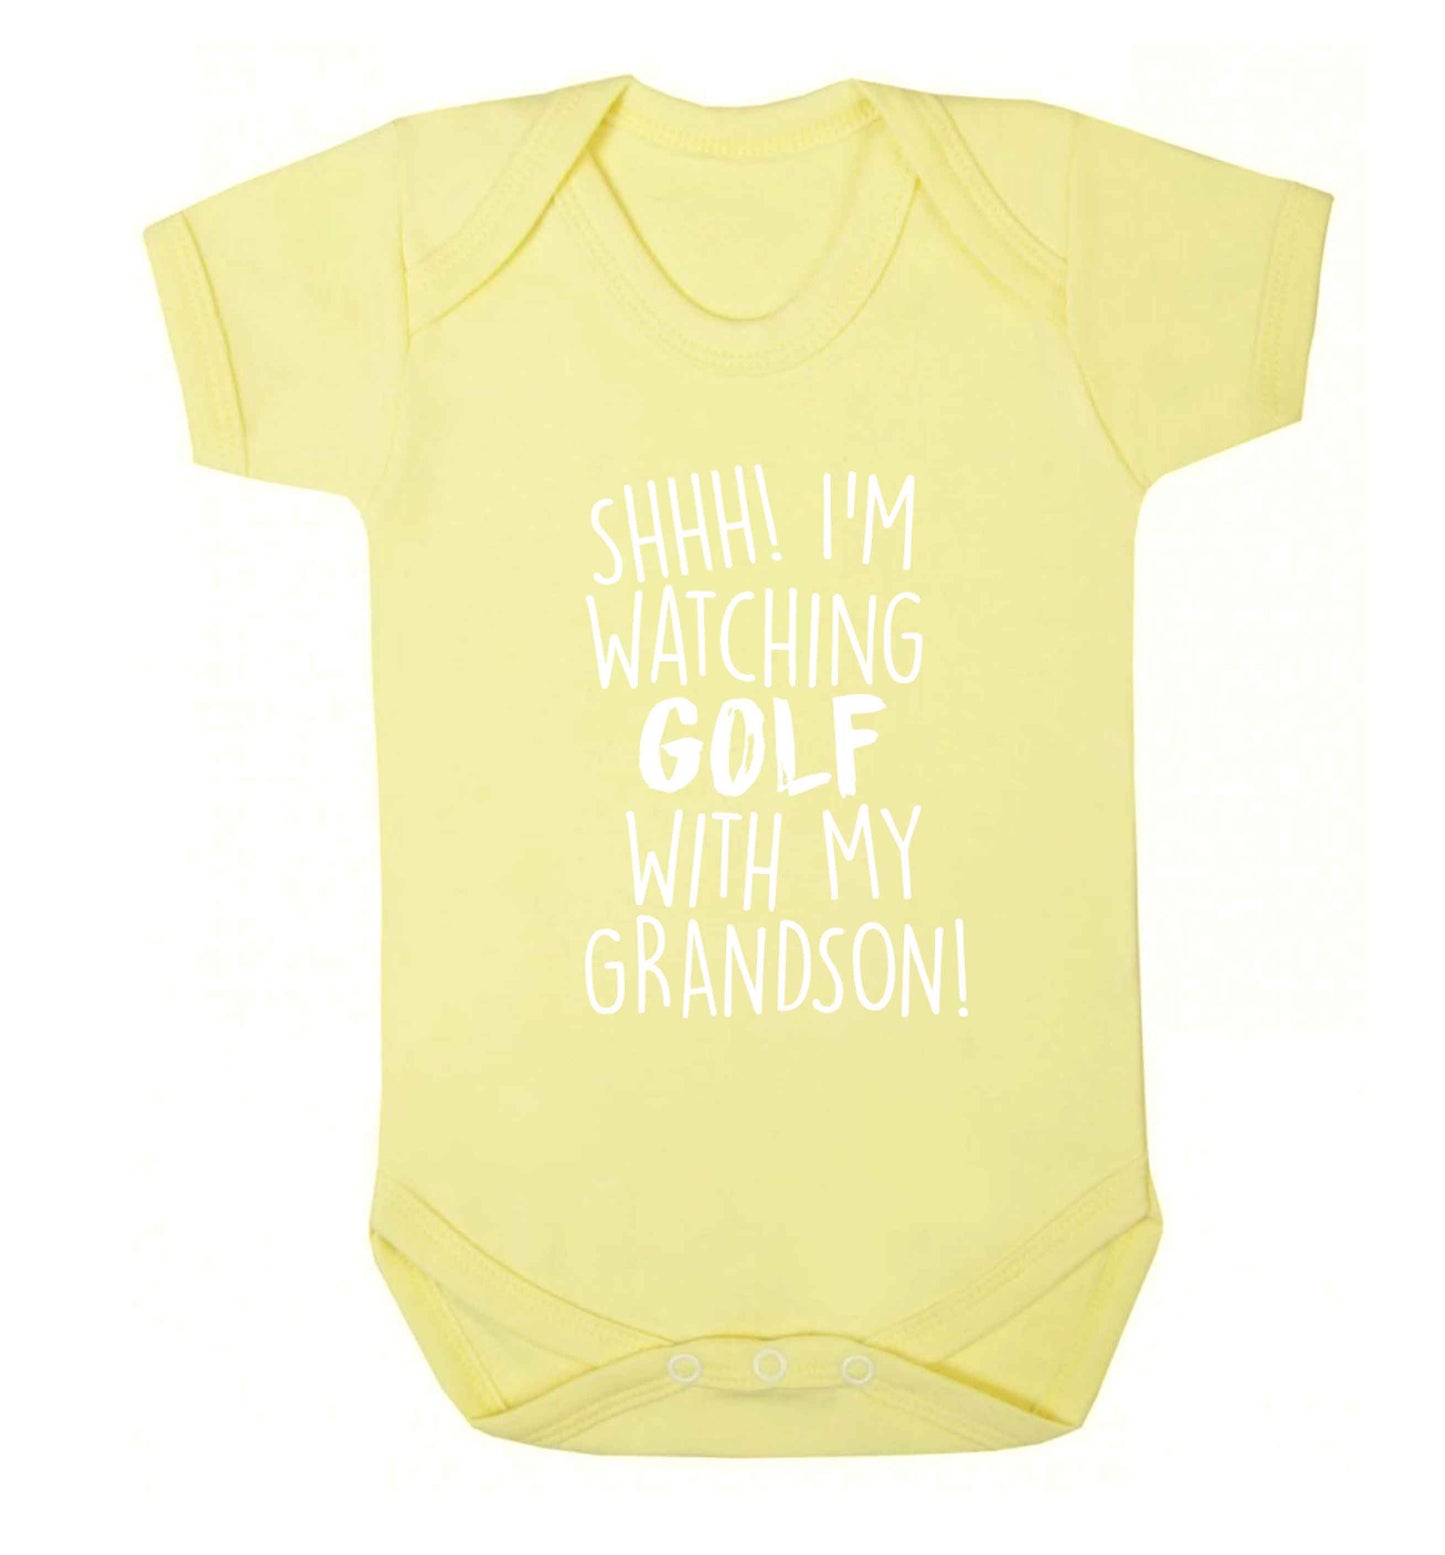 Shh I'm watching golf with my grandsonBaby Vest pale yellow 18-24 months